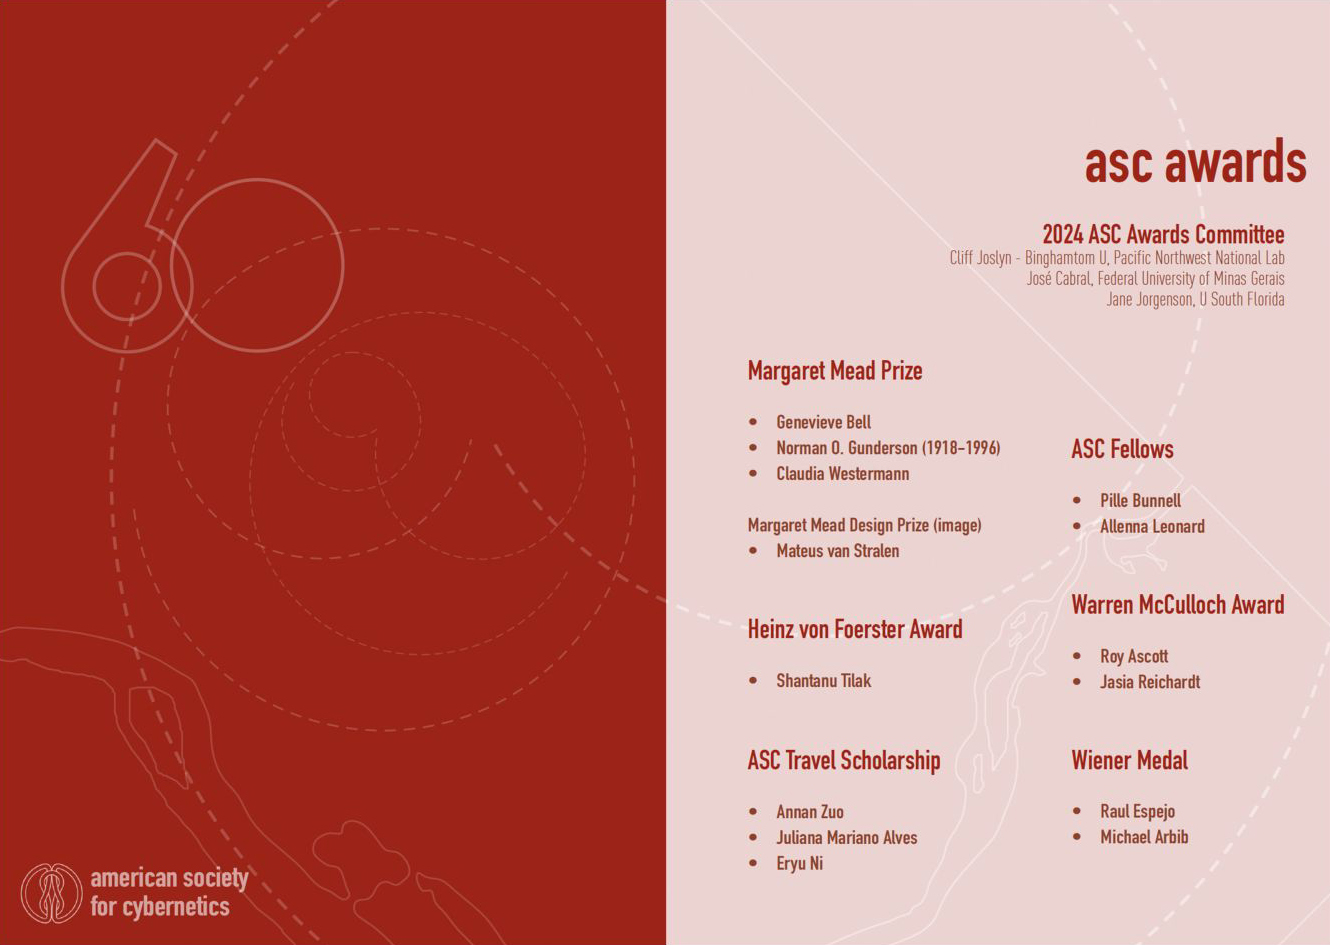 This image shows an awards program for the American Society for Cybernetics (ASC) Awards in 2024. The design is split into two halves - a dark red section on the left featuring the ASC logo and a stylized "60" (likely referencing the 60th anniversary), and a light pink section on the right containing the awards information. The right side lists the following awards and recipients:  Margaret Mead Prize:  Genevieve Bell Norman D. Gunderson (1918-1996) Claudia Westermann   Margaret Mead Design Prize (image):  Mateus van Stralen   Heinz von Foerster Award:  Shantanu Tilak   ASC Travel Scholarship:  Annan Zuo Juliana Mariano Alves Eryu Ni   ASC Fellows:  Pille Bunnell Allenna Leonard   Warren McCulloch Award:  Roy Ascott Jasia Reichardt   Wiener Medal:  Raul Espejo Michael Arbib    The image also lists the 2024 ASC Awards Committee members:  Cliff Joslyn - Binghamton U, Pacific Northwest National Lab José Cabral, Federal University of Minas Gerais Jane Jorgenson, U South Florida  The overall design is minimalist and elegant.